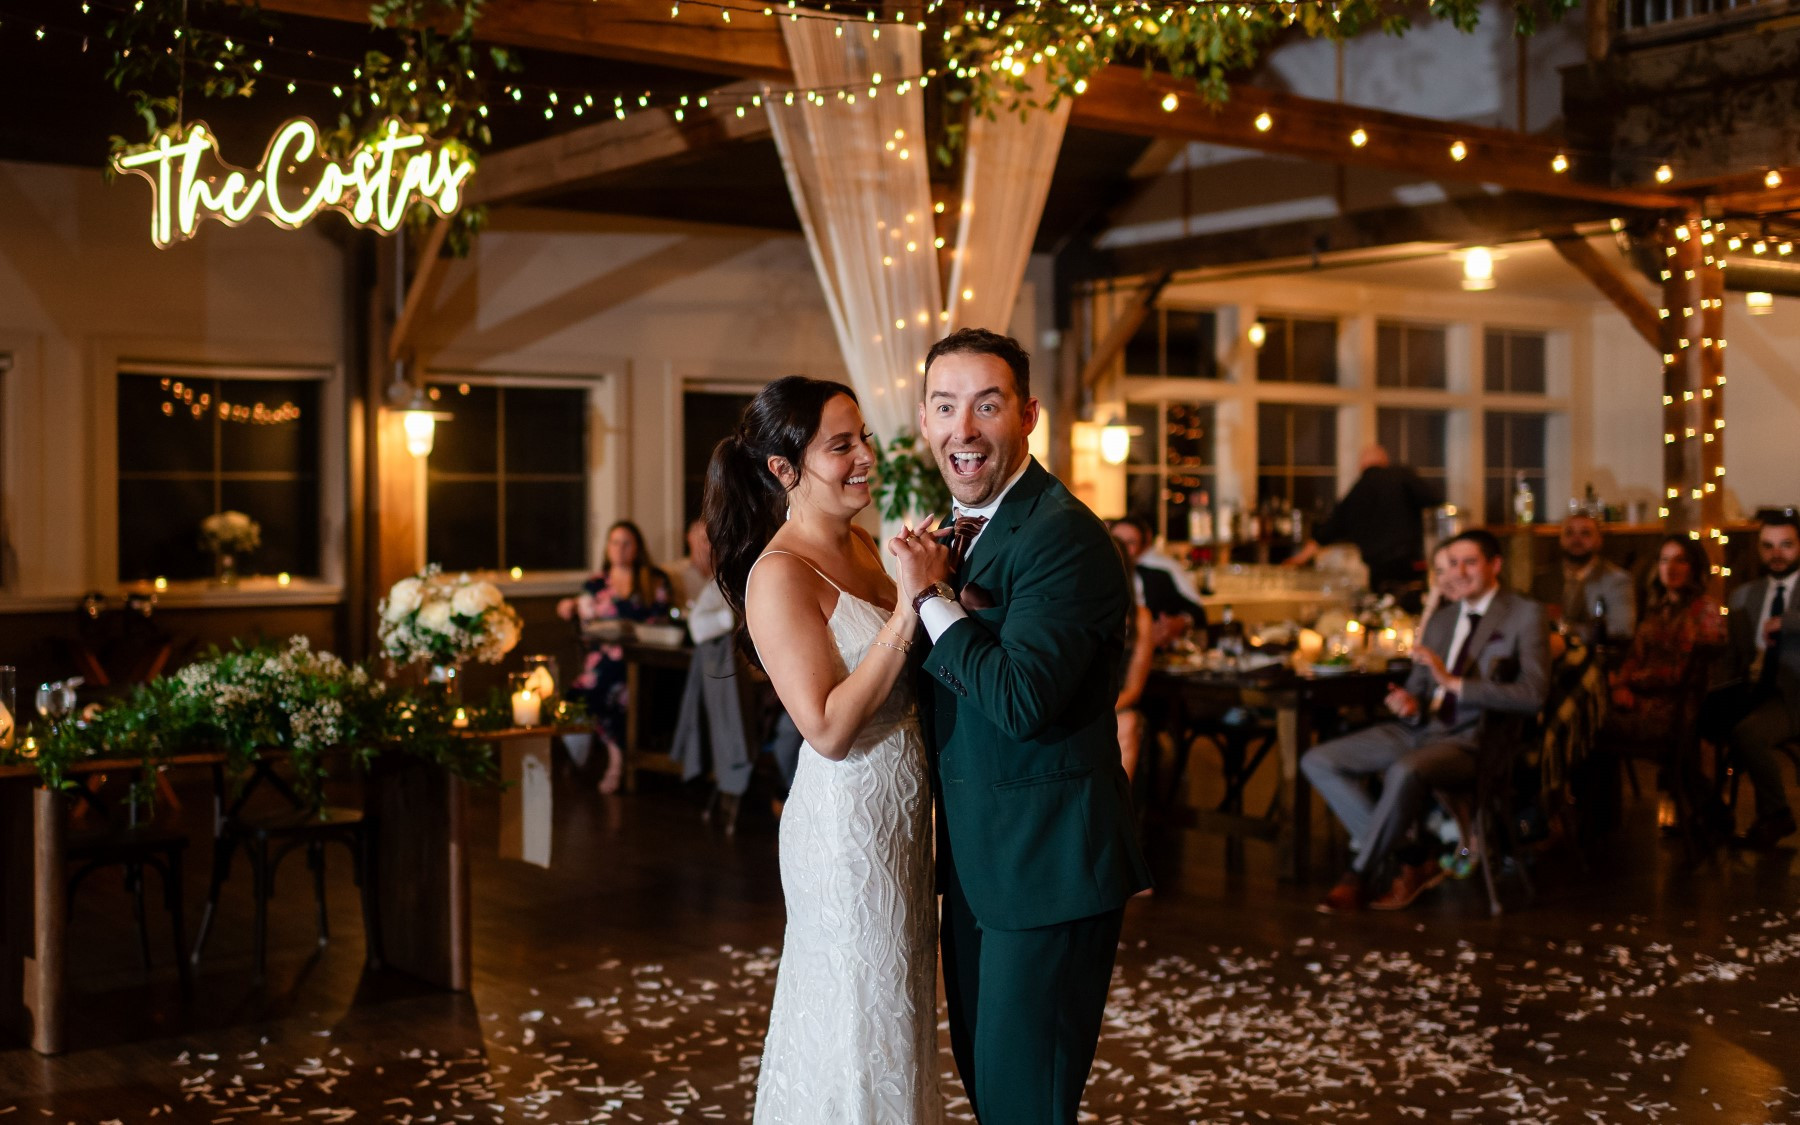 bride and groom in event barn holding hands while doing their first dance. drapery, lights, and greenery surround them with guests in the background in the event barn.